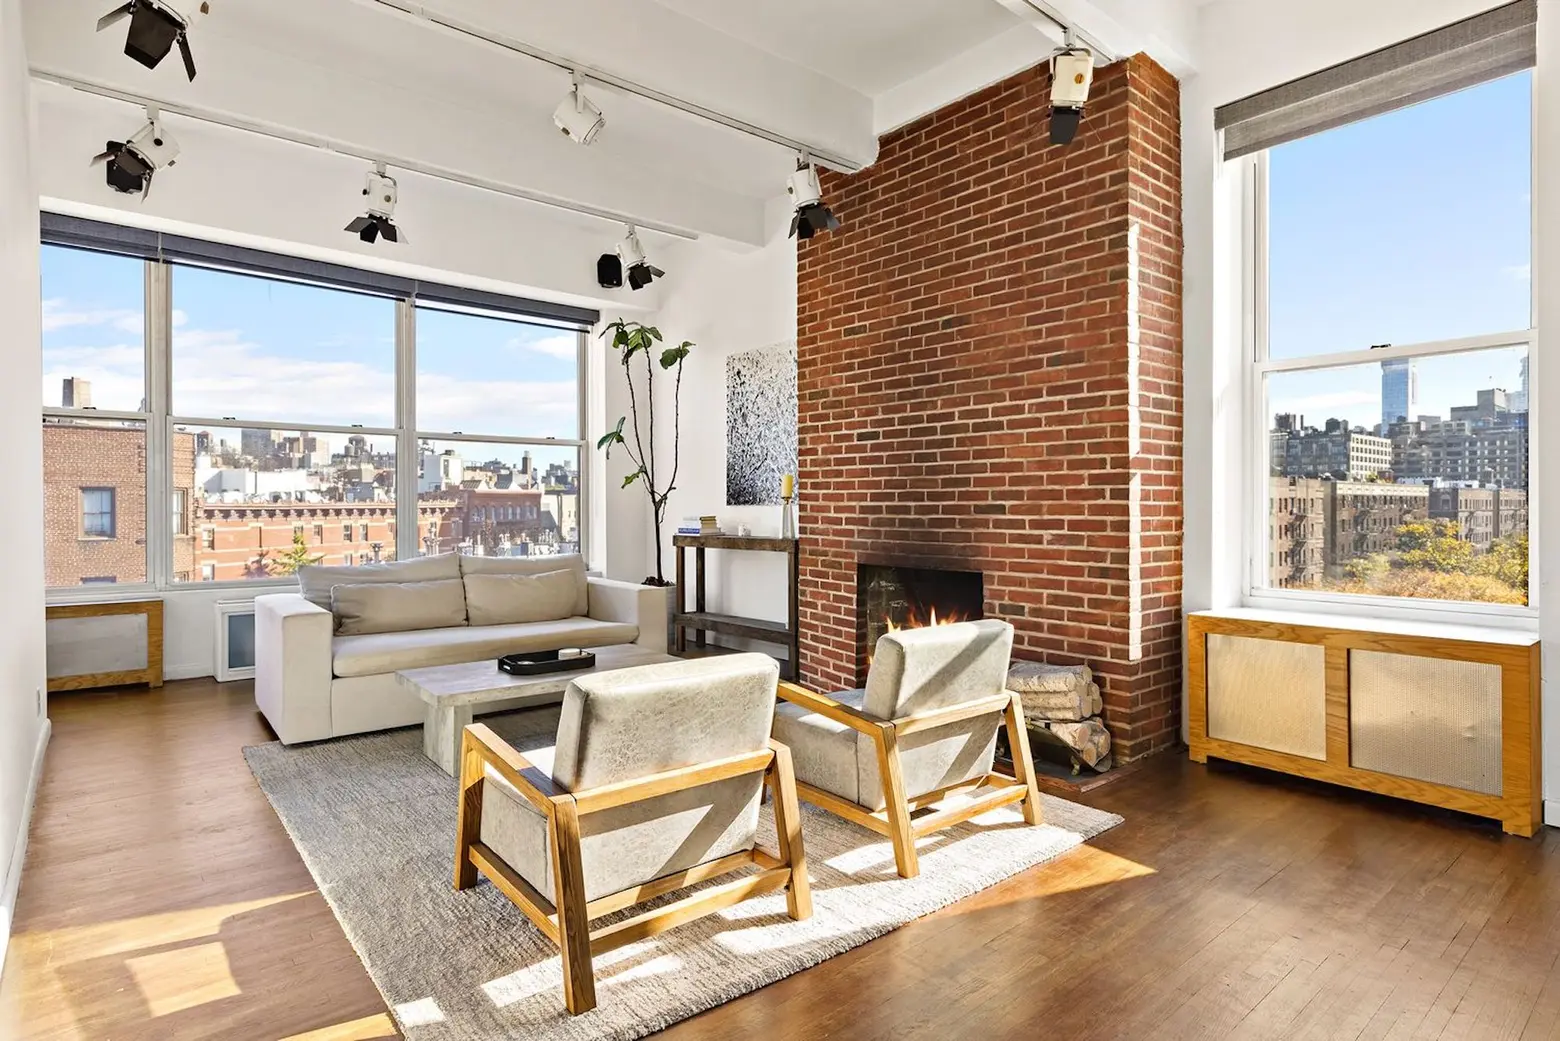 West Village co-op has a shared landscaped courtyard and roof deck for $2.75M